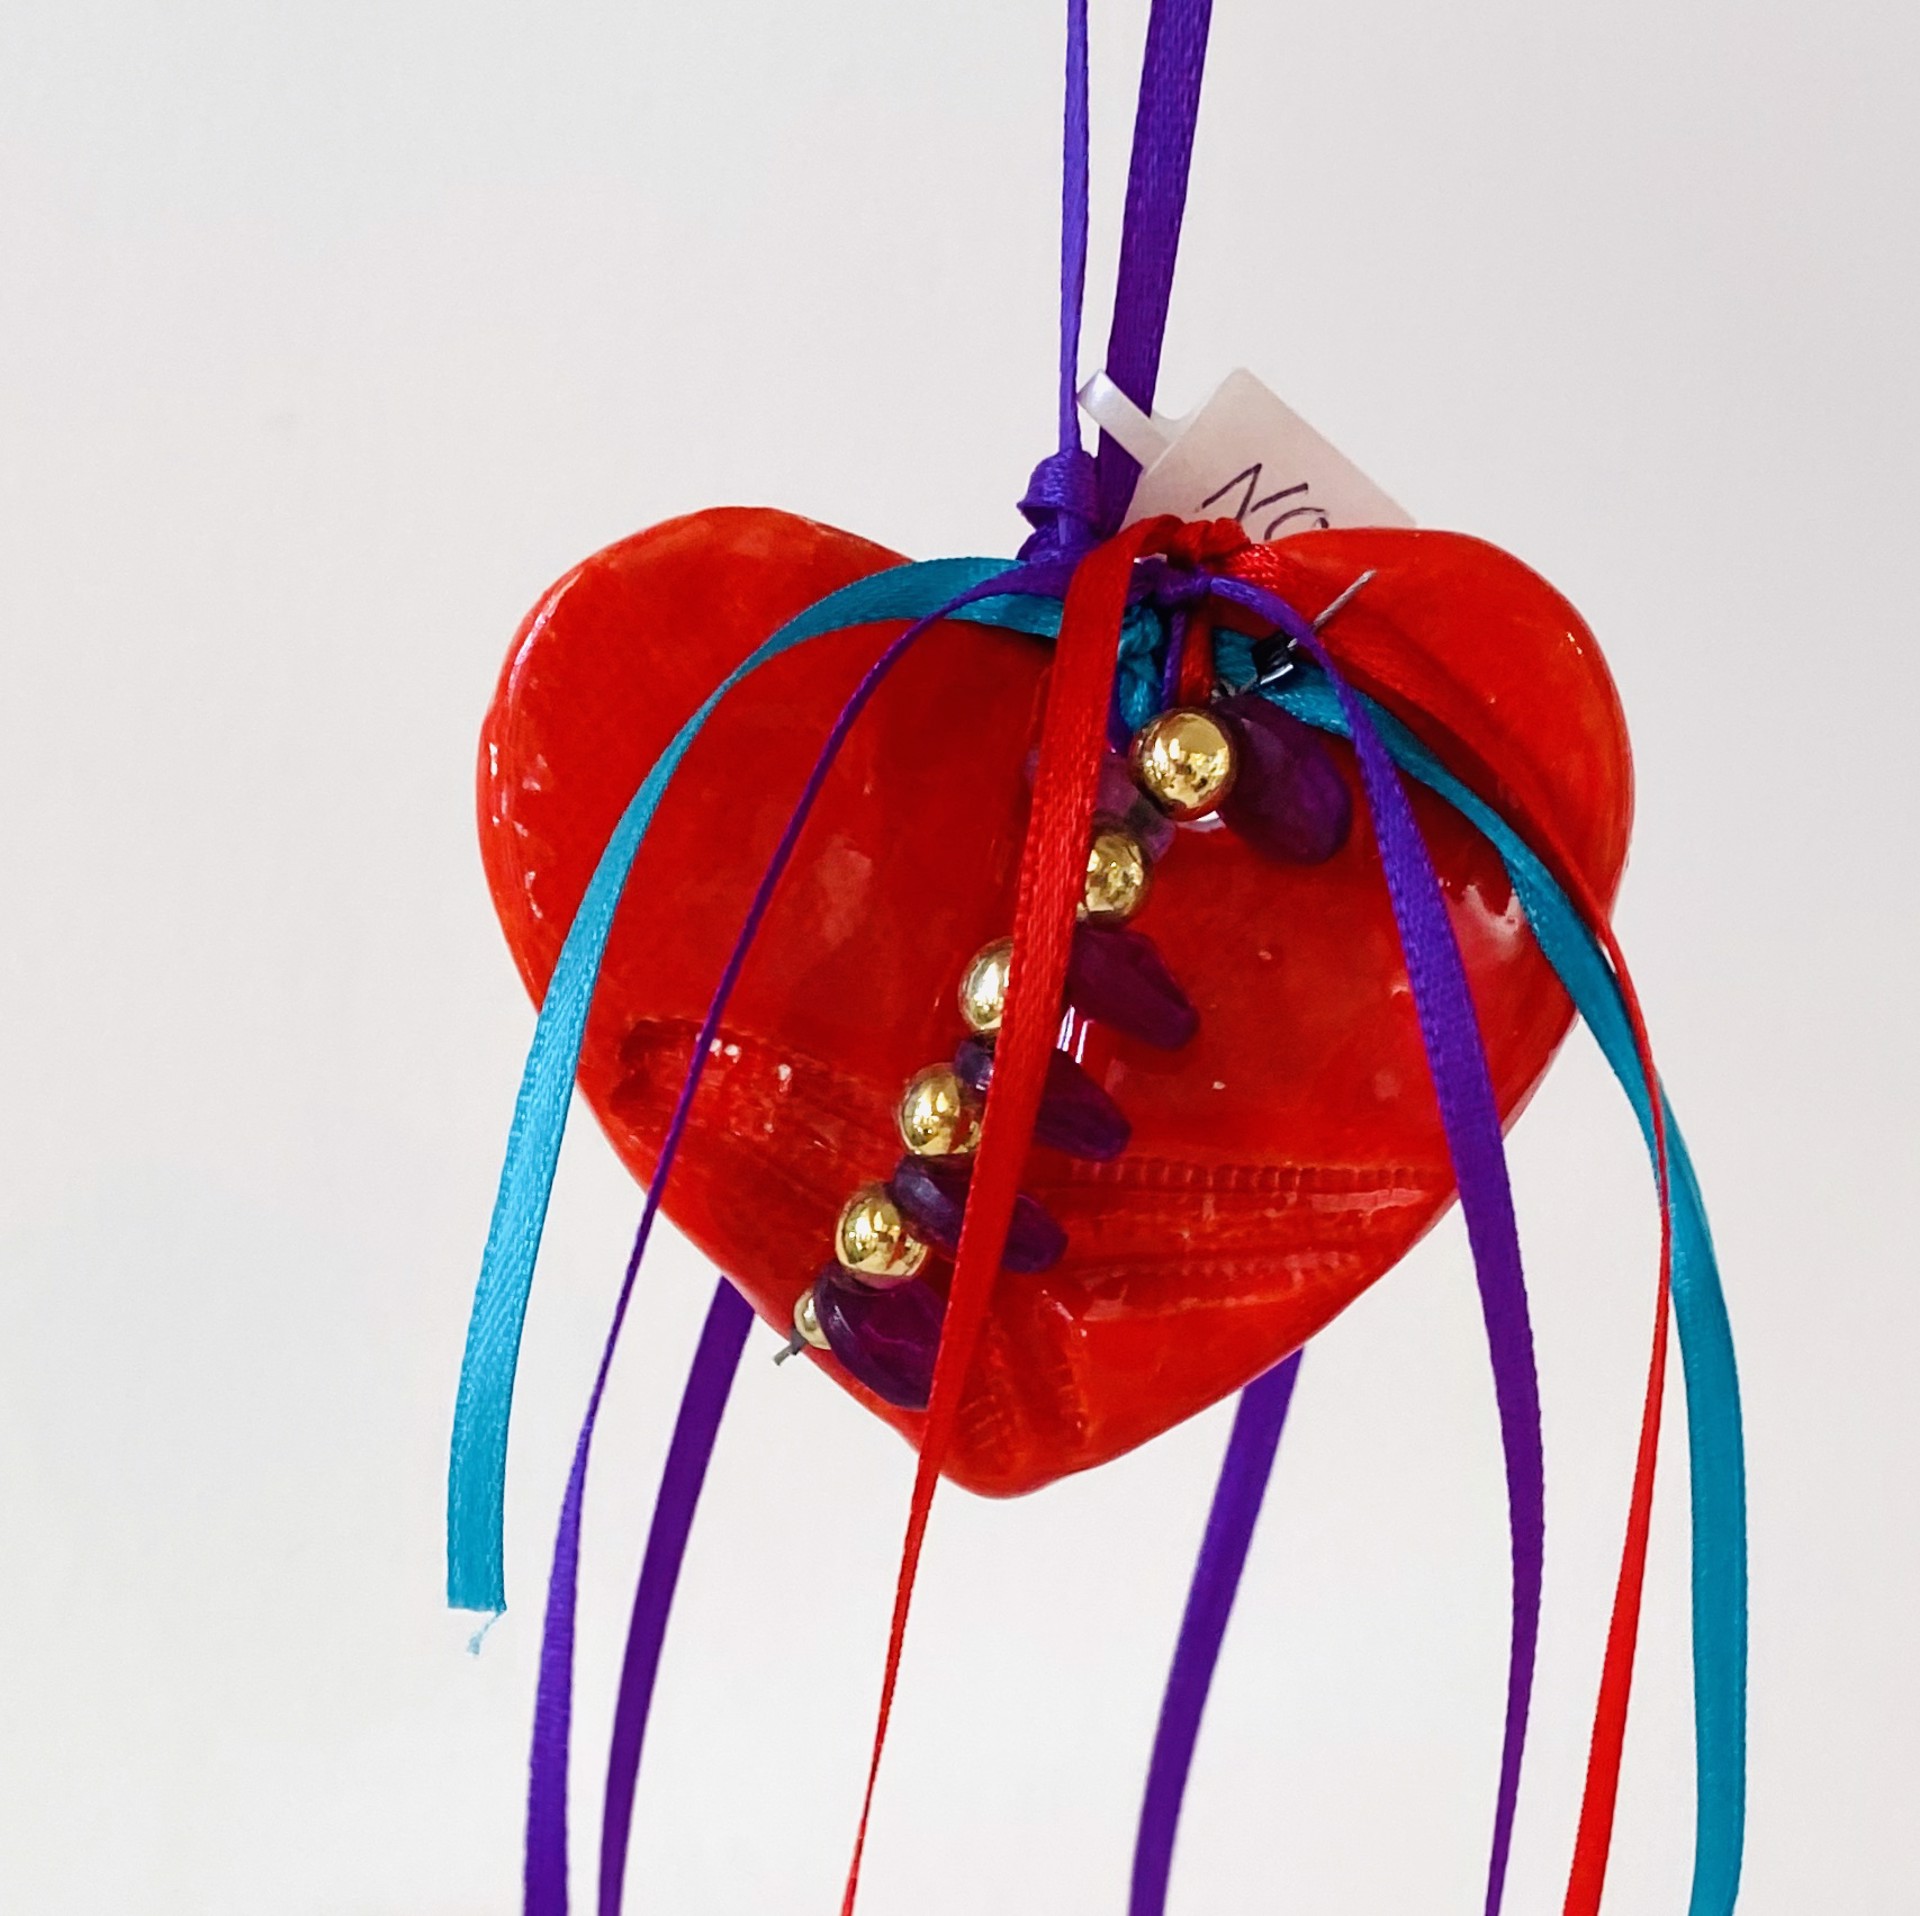 Heart Ornament with starfish detail, #7 by Judy Kepley